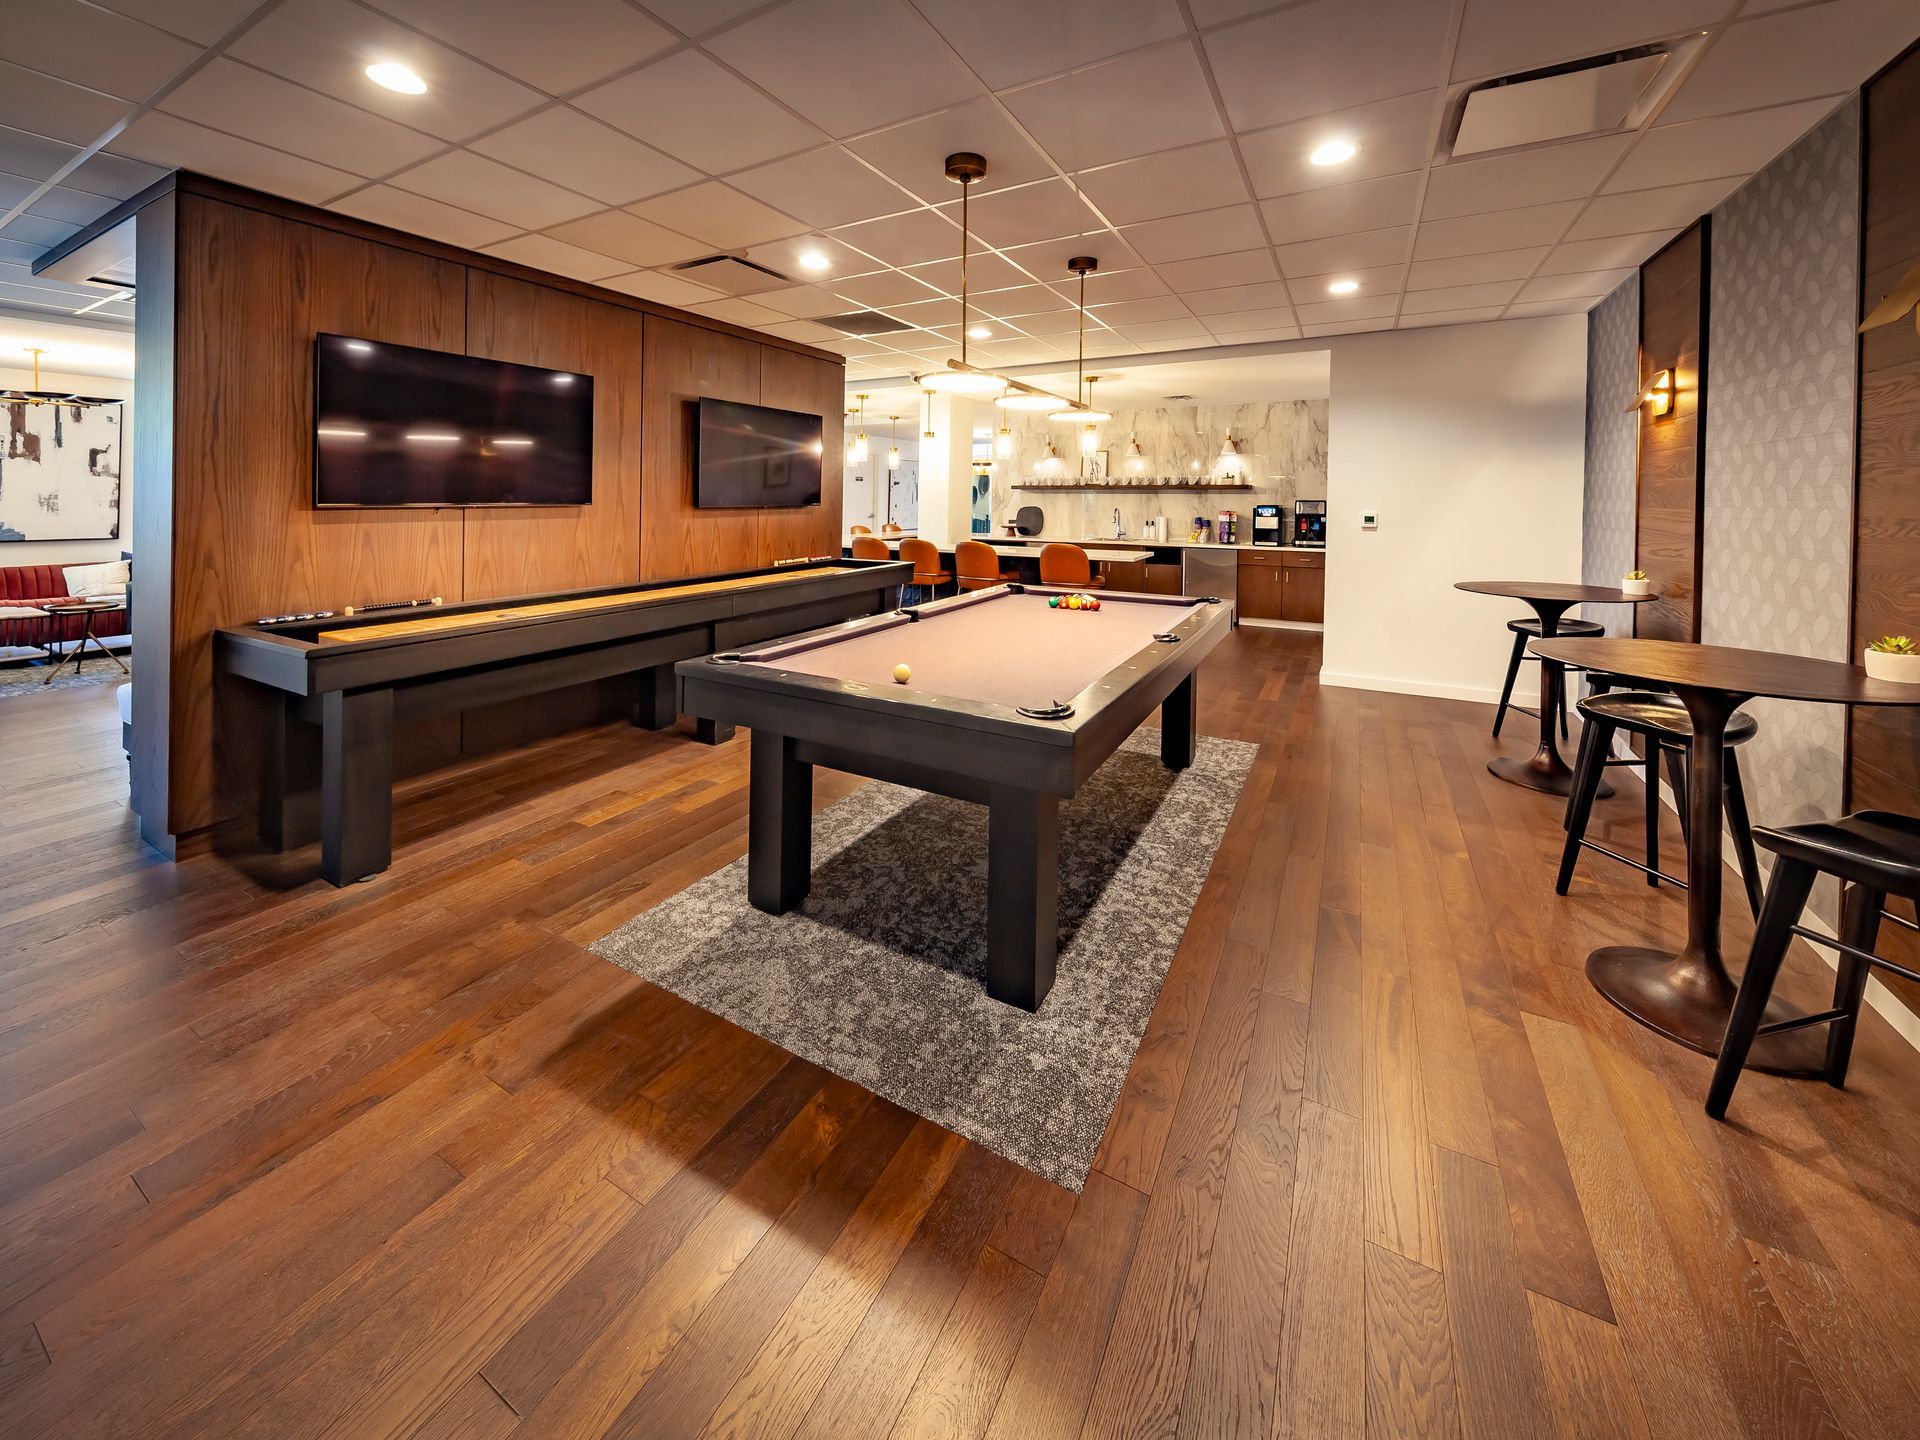 There is a pool table in the middle of the room at  Riley Towers, Indianapolis, IN. 